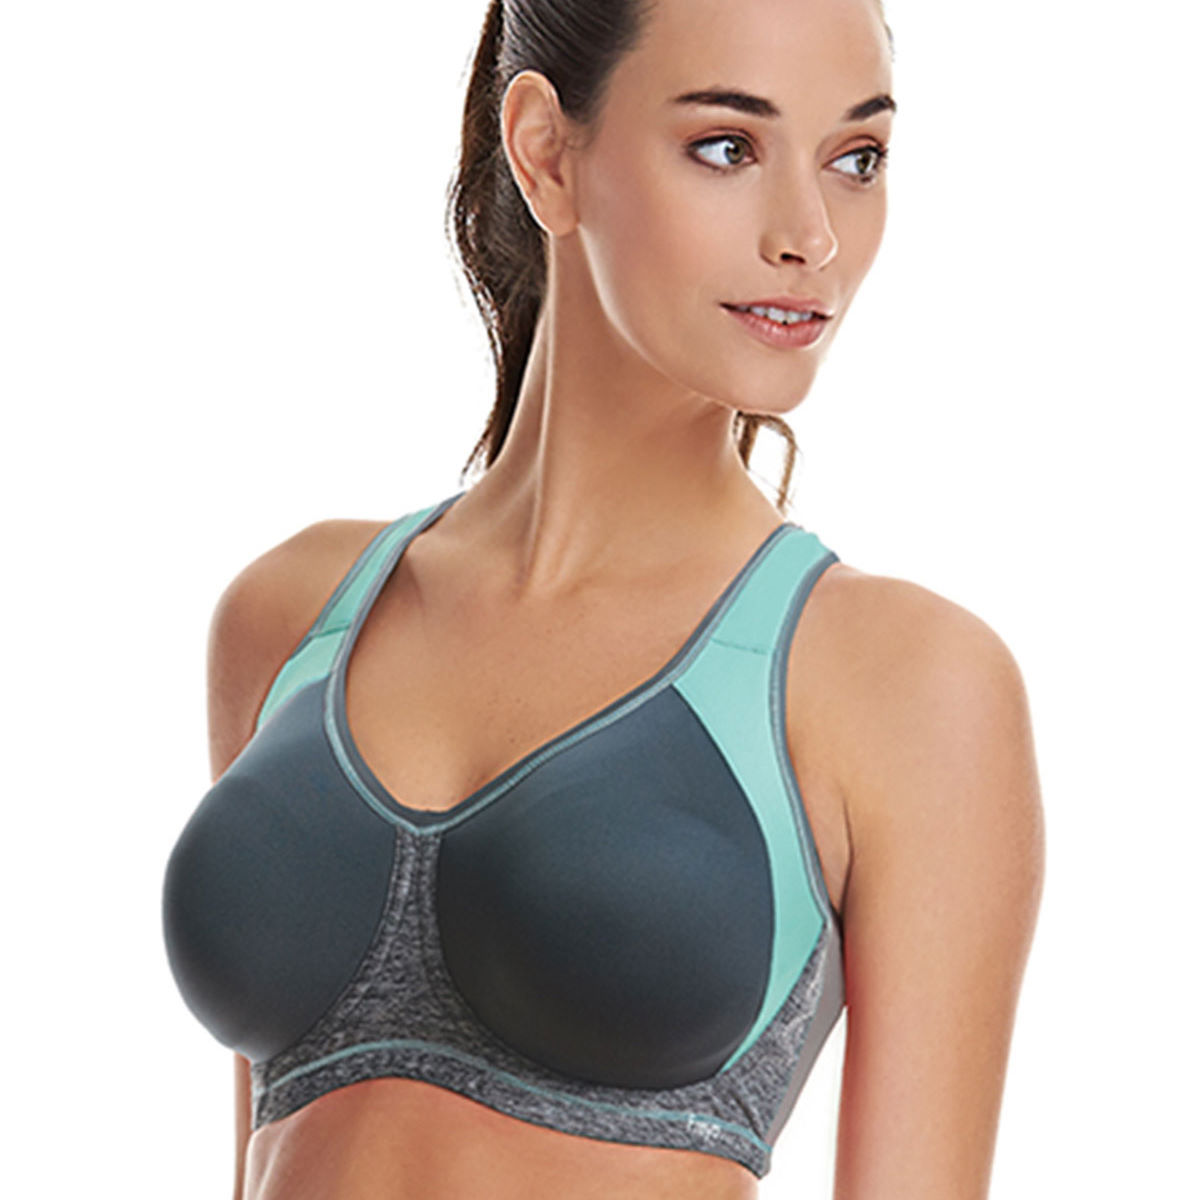 Best Sports Bra To Wear After Breast Augmentation Photos, Download